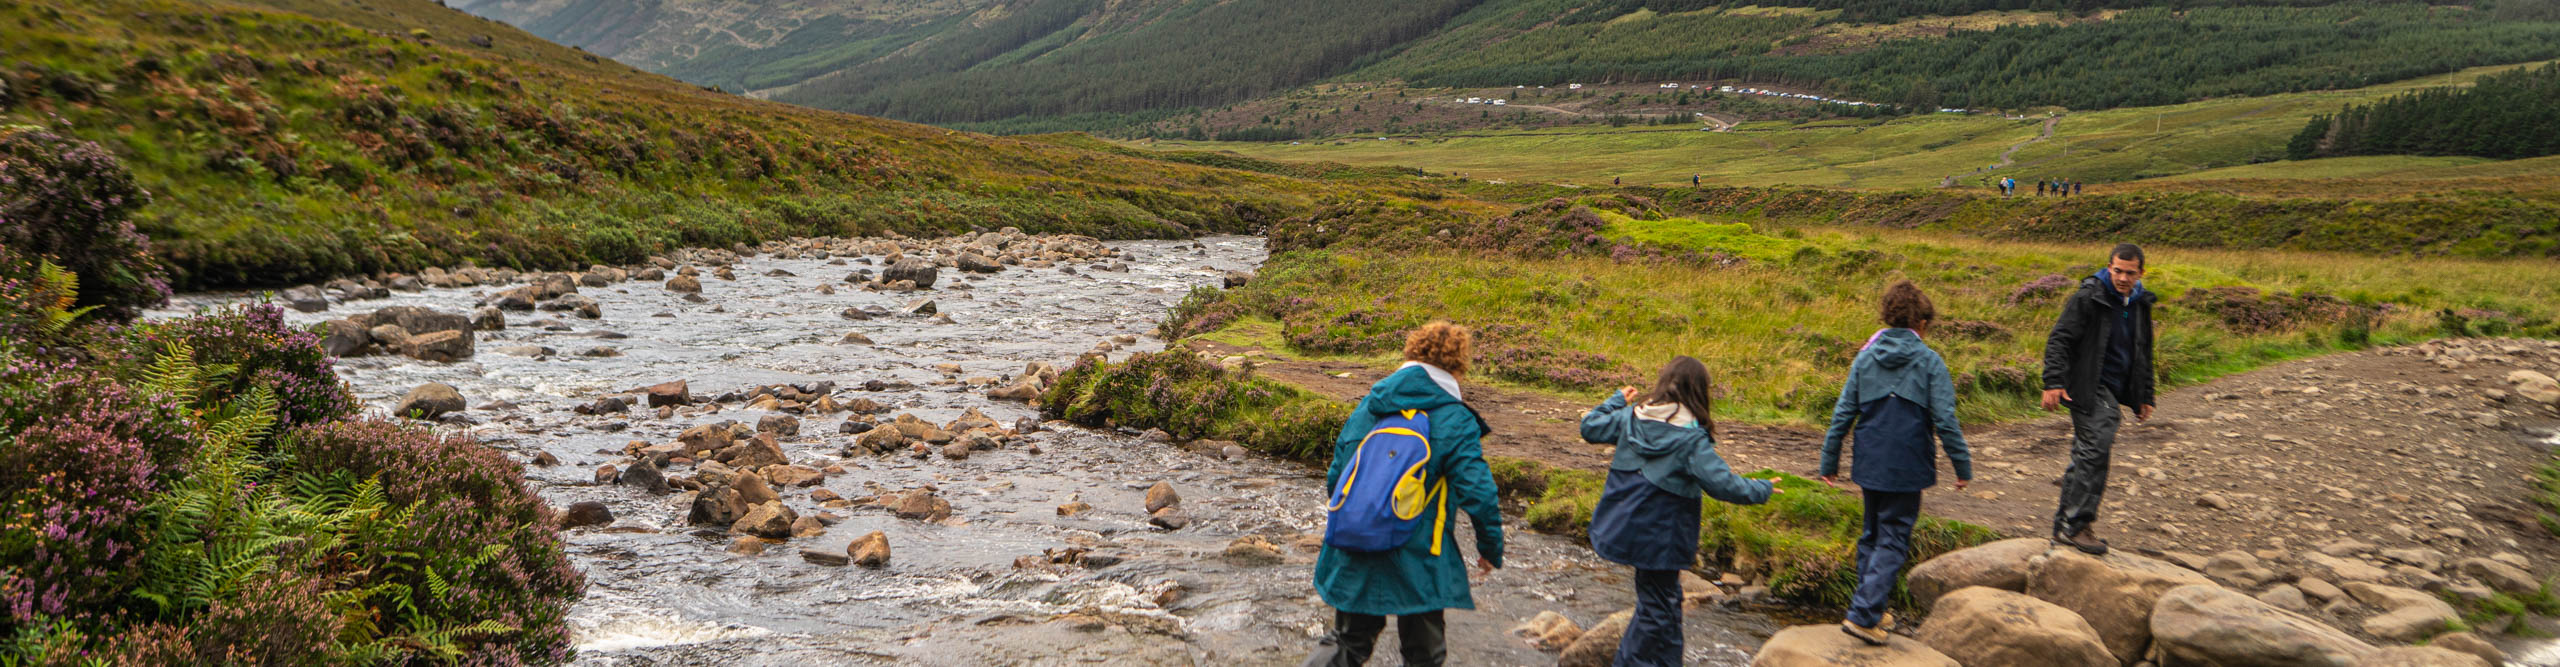 Hikers walking across a stream in the Scottish Highlands 